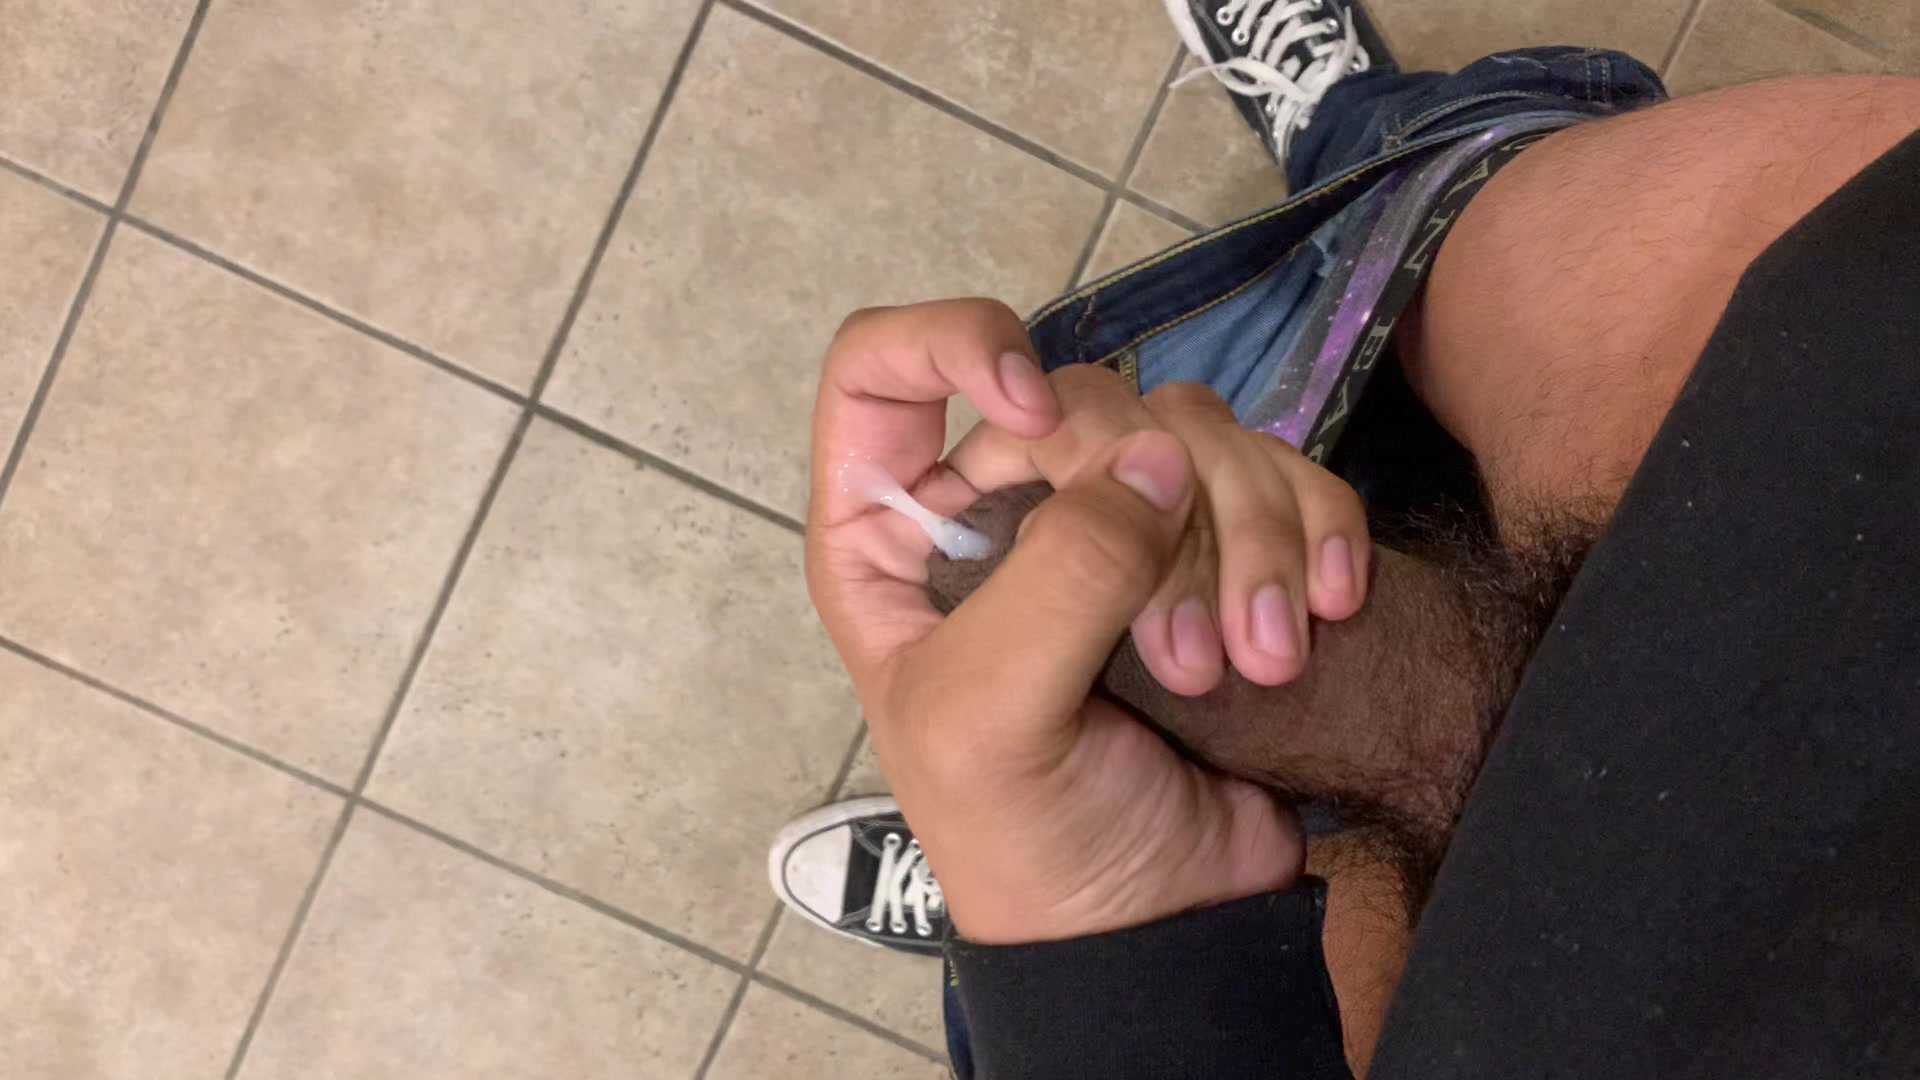 Quick cum outside stall